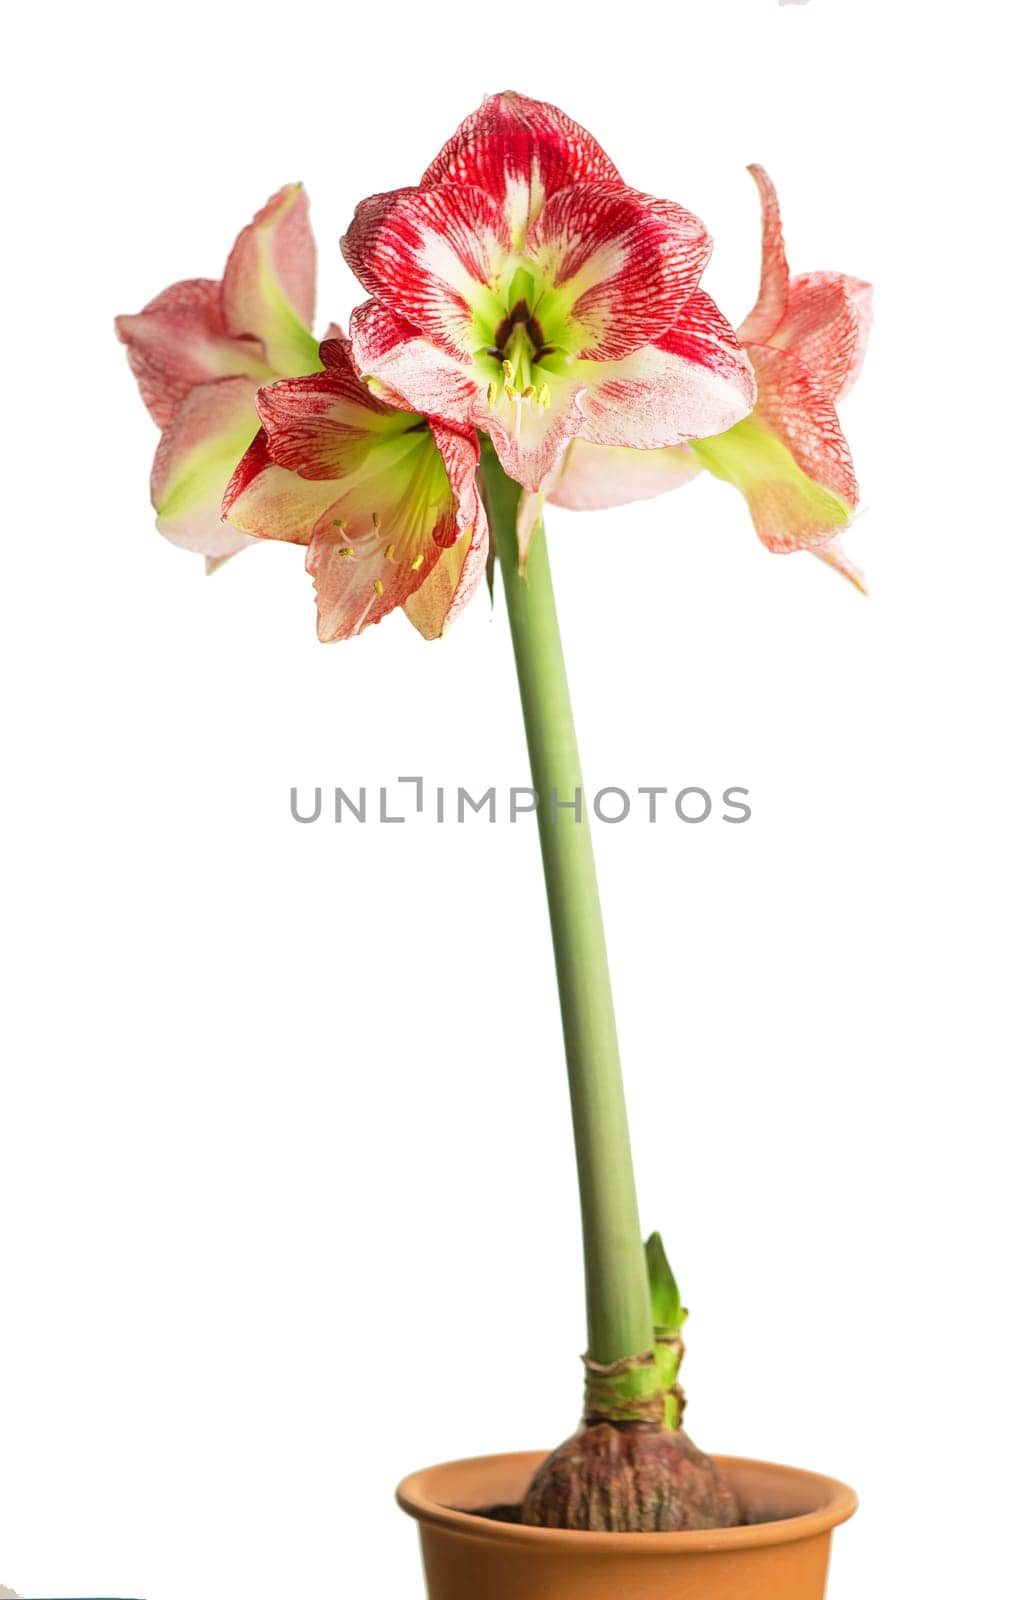 amaryllis flower blooming isolated with clipping path on white background, Amaryllis, Hippeastrums flowers